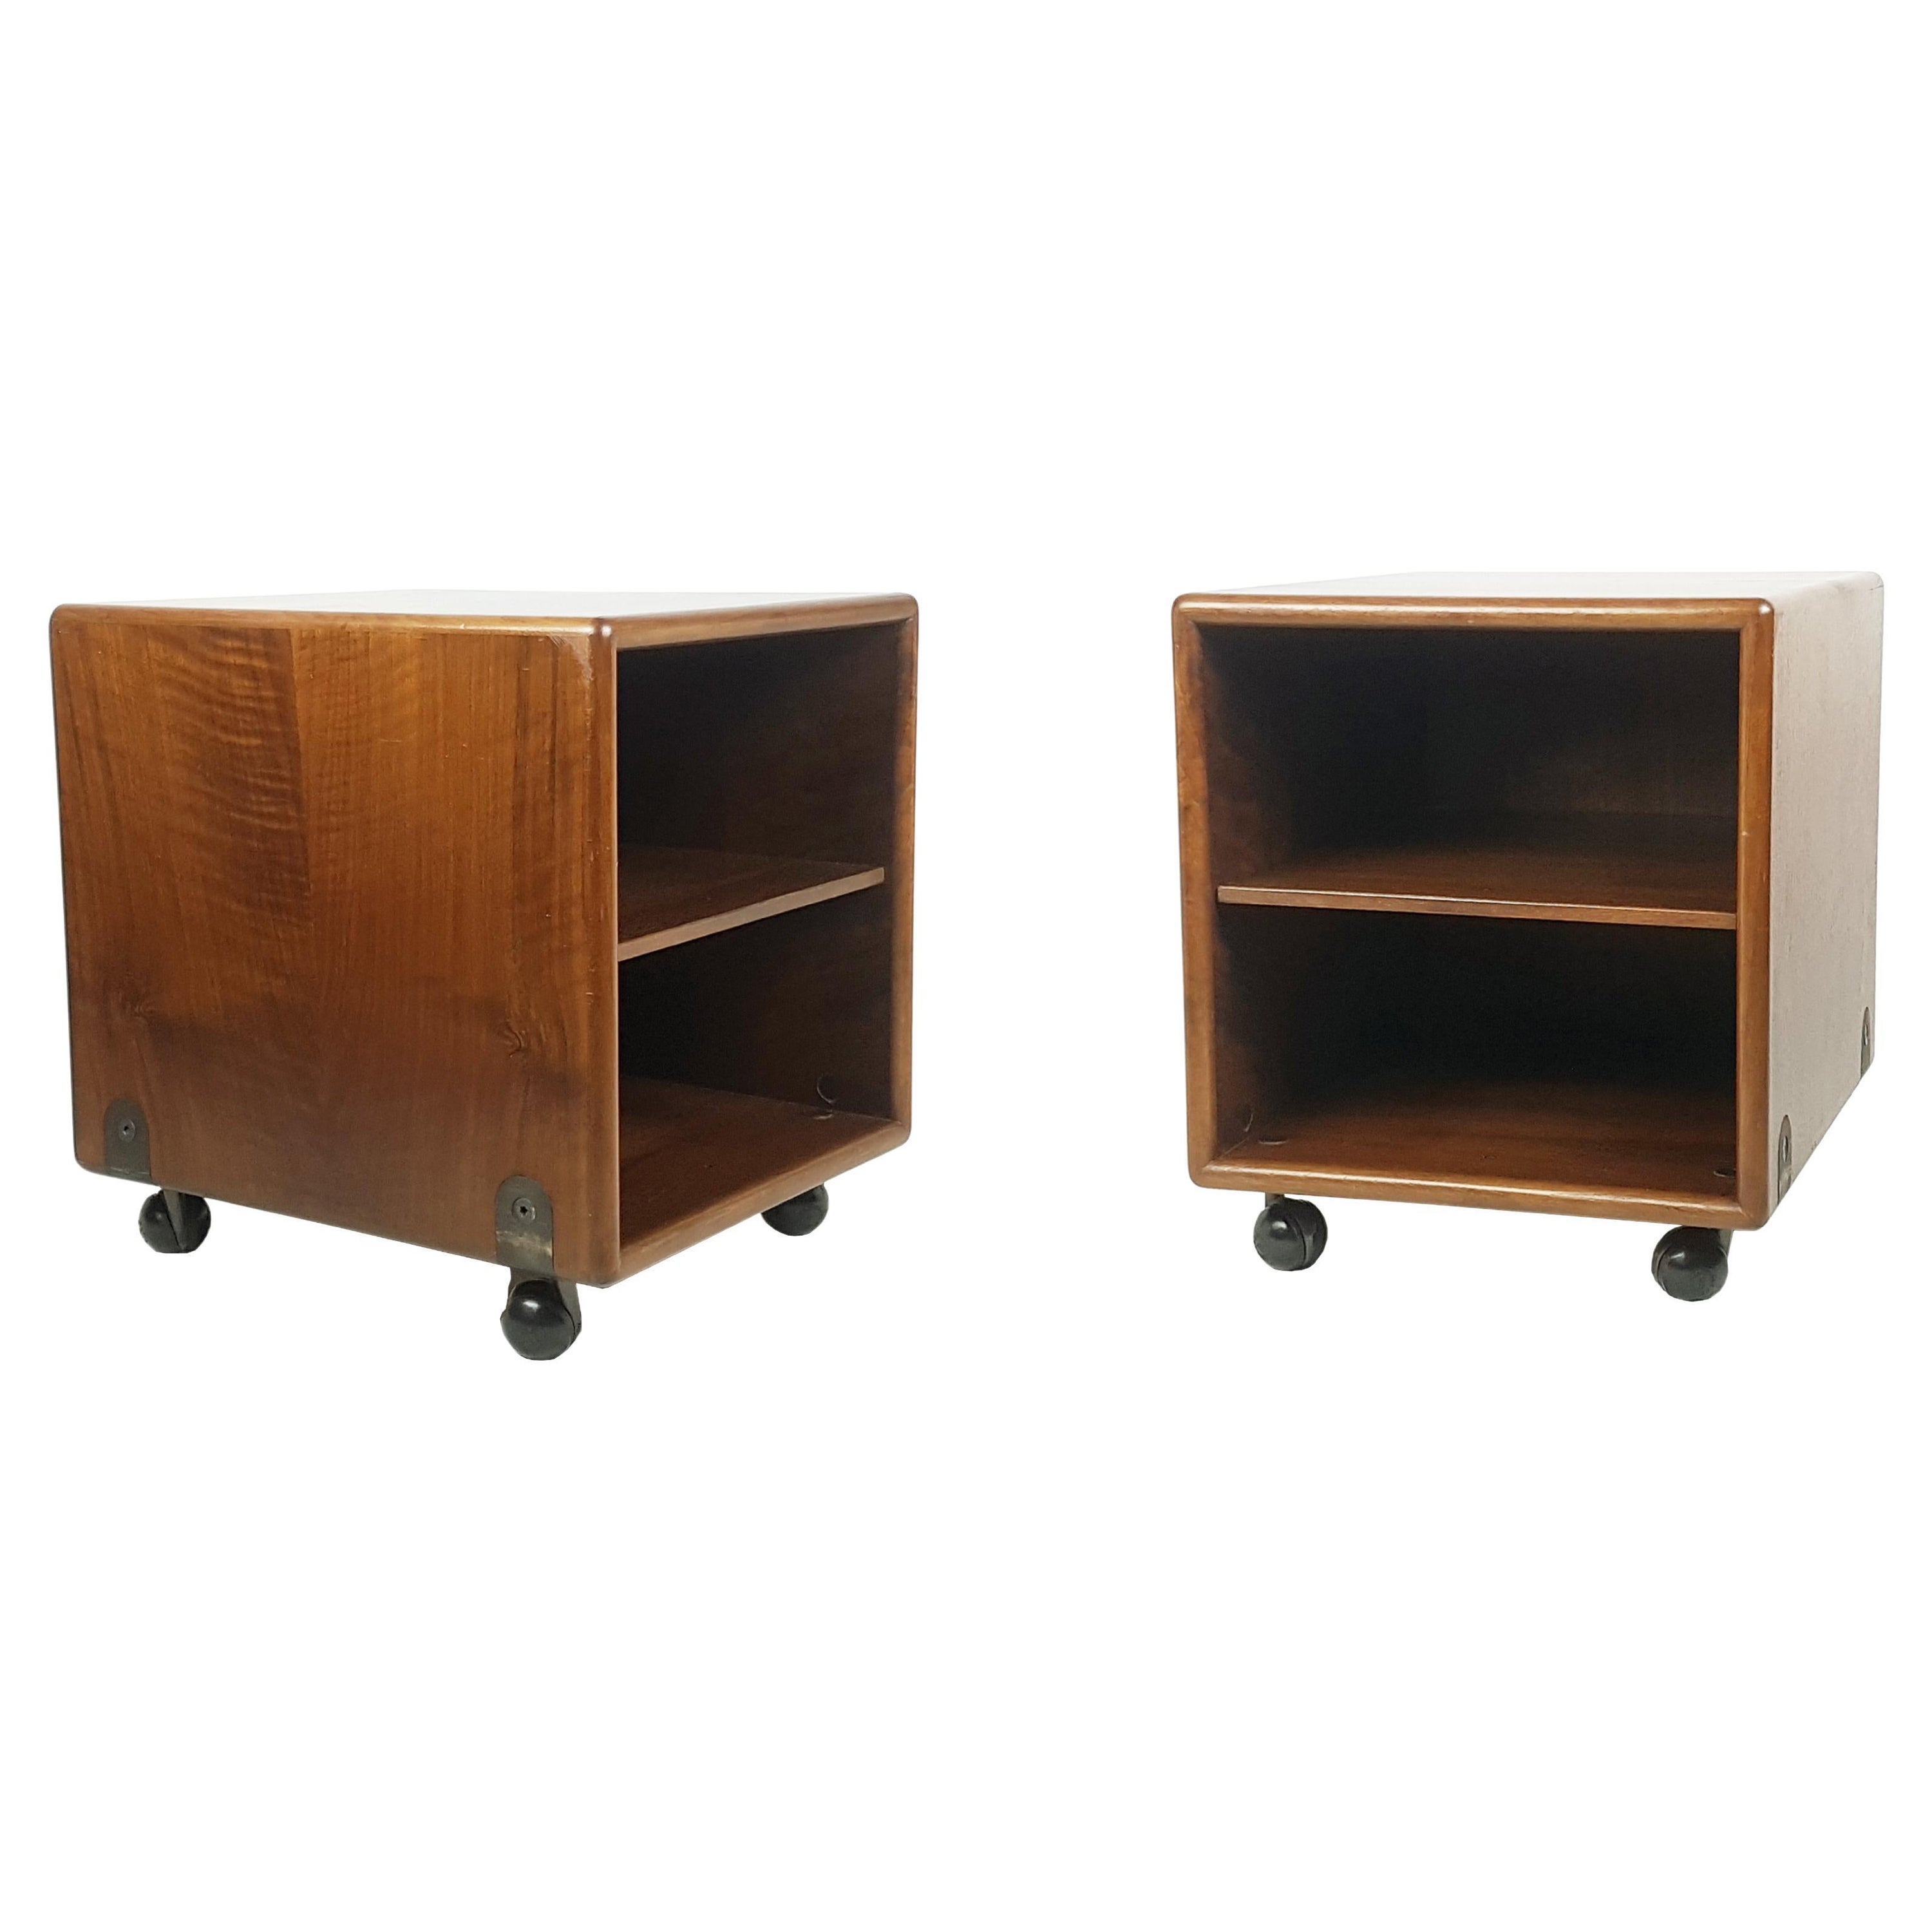 Pair of Walnut & Anodized Metal 1960s Nightstands by Silvio Coppola for Bernini